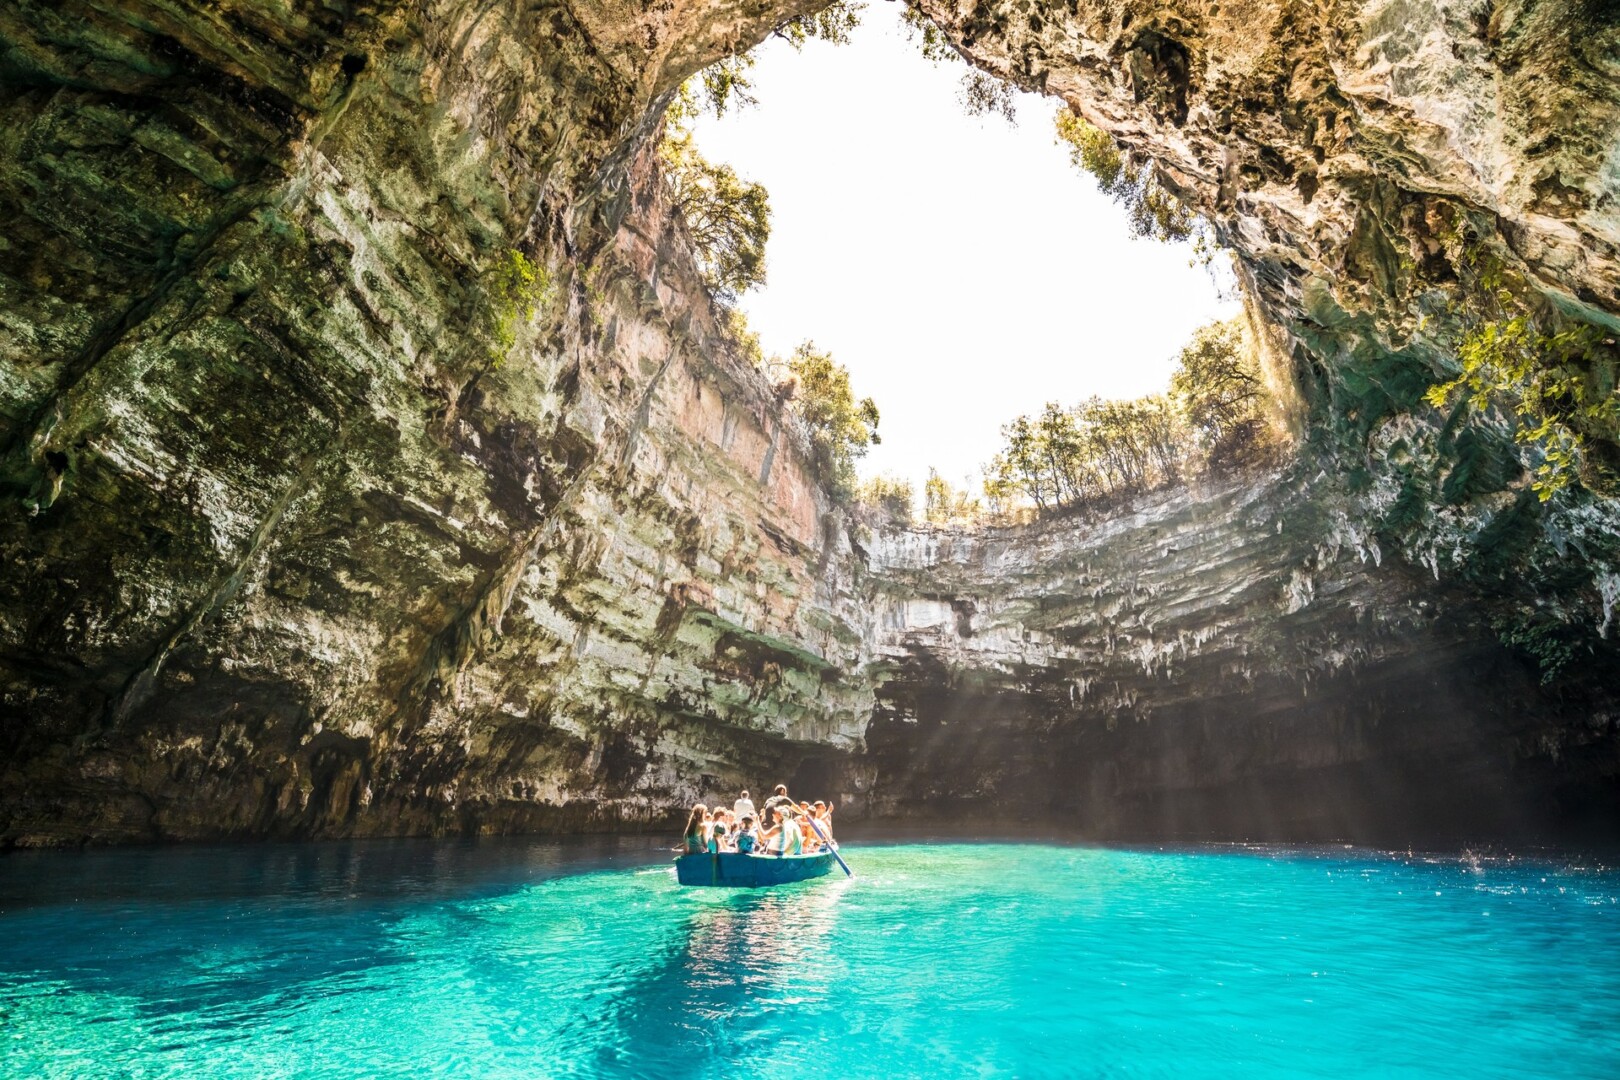 tourists-with-wooden-boat-visit-famous-cave-lake-m-2021-08-29-01-15-42-utc